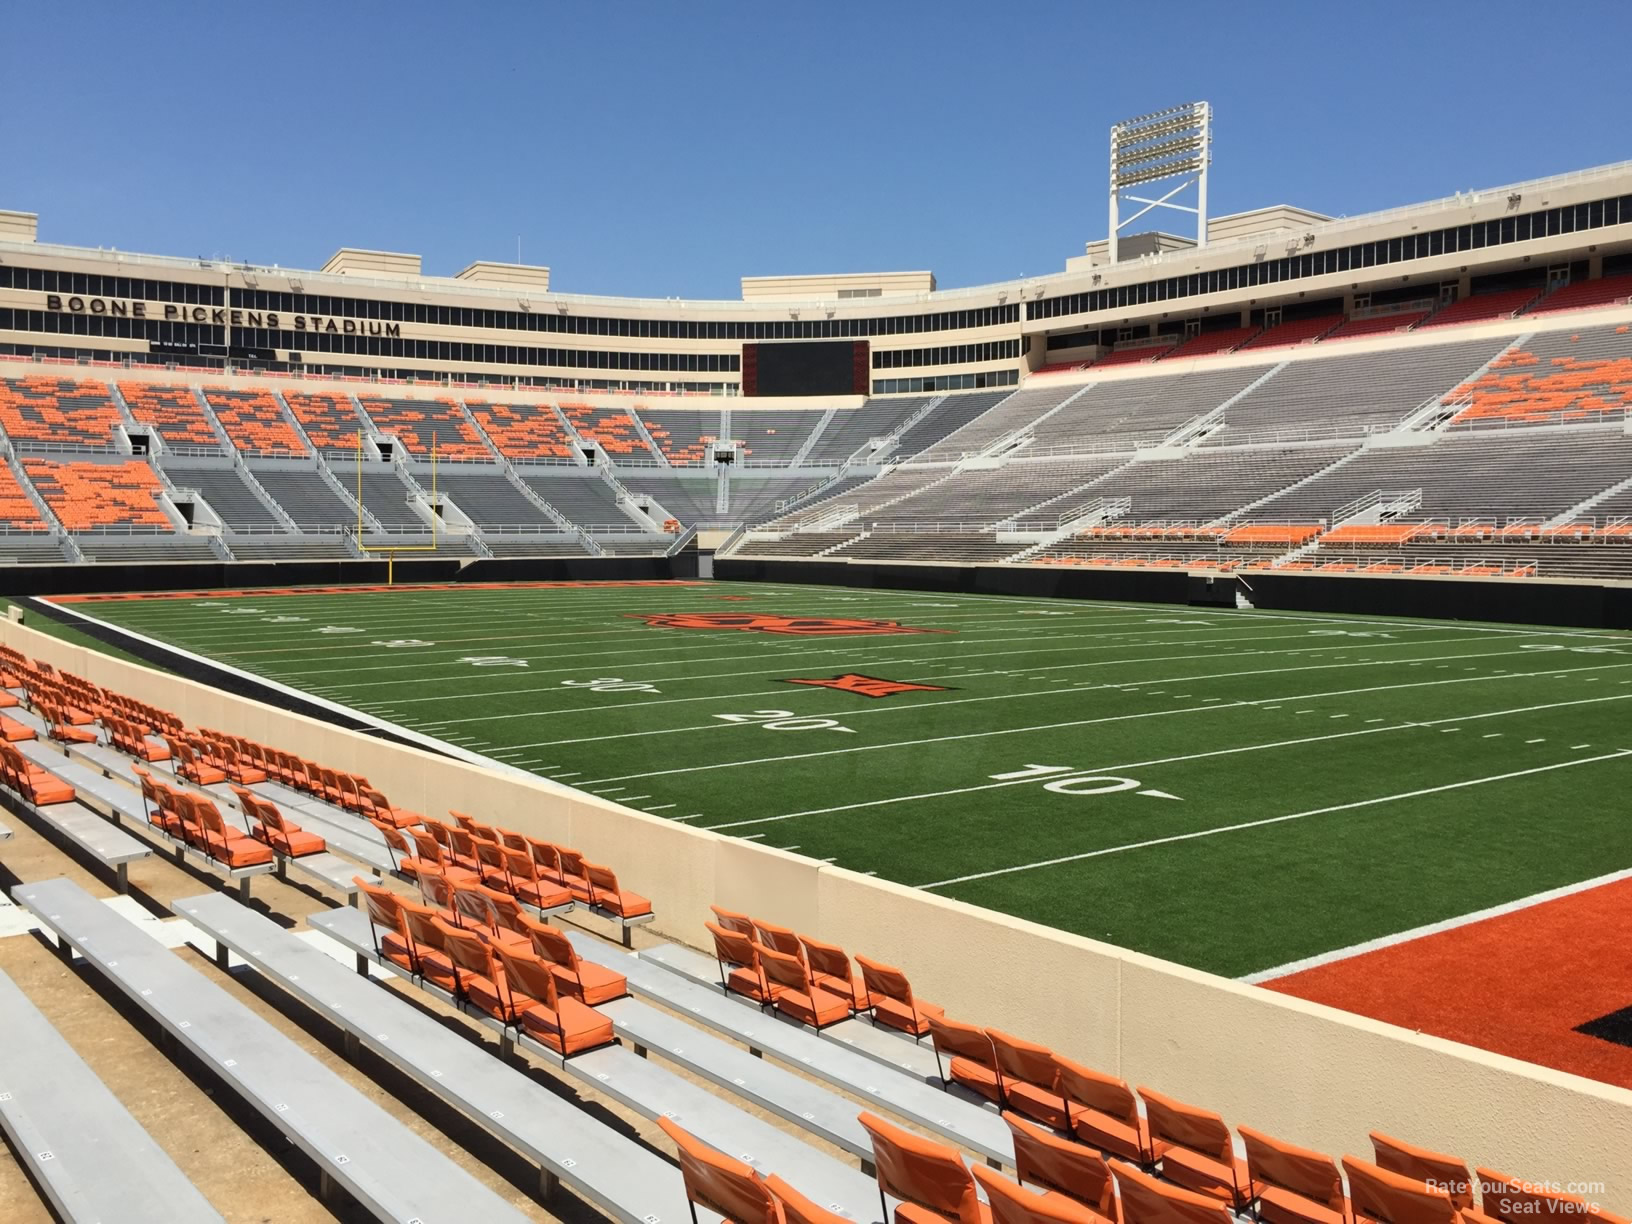 section 101, row 10 seat view  - boone pickens stadium